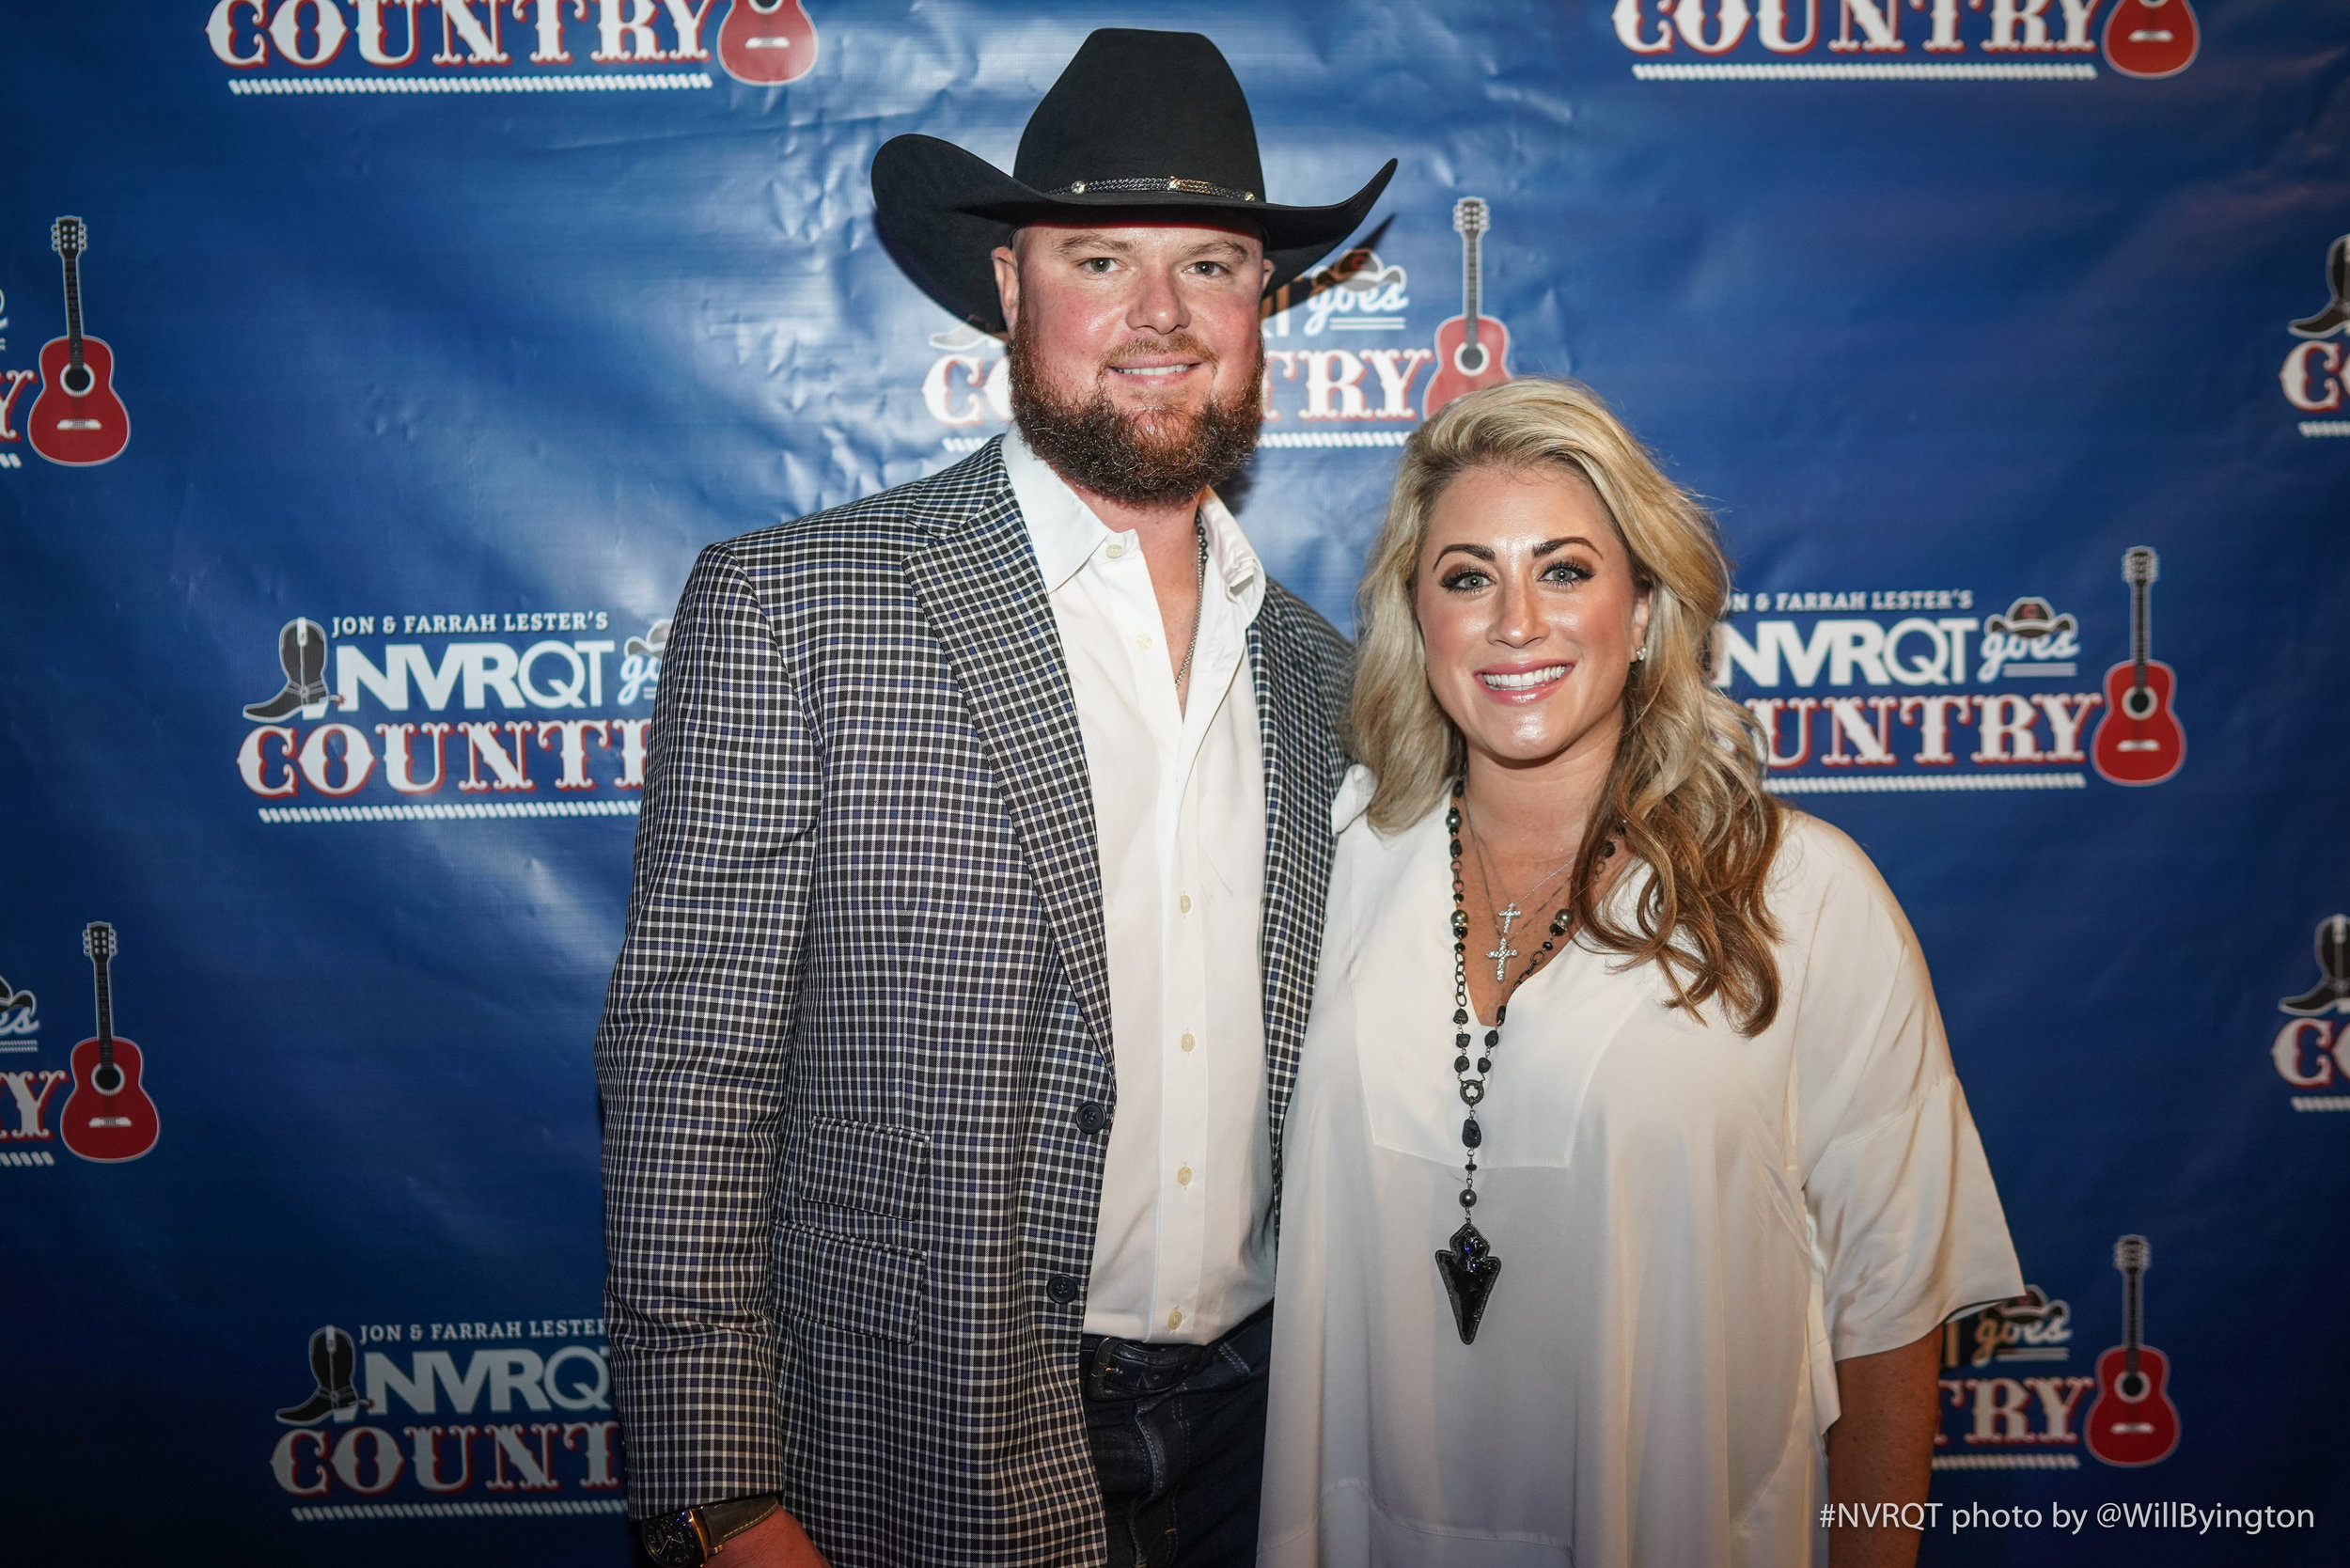 NVRQT Goes Country with Jon and Farrah Lester — NVRQT